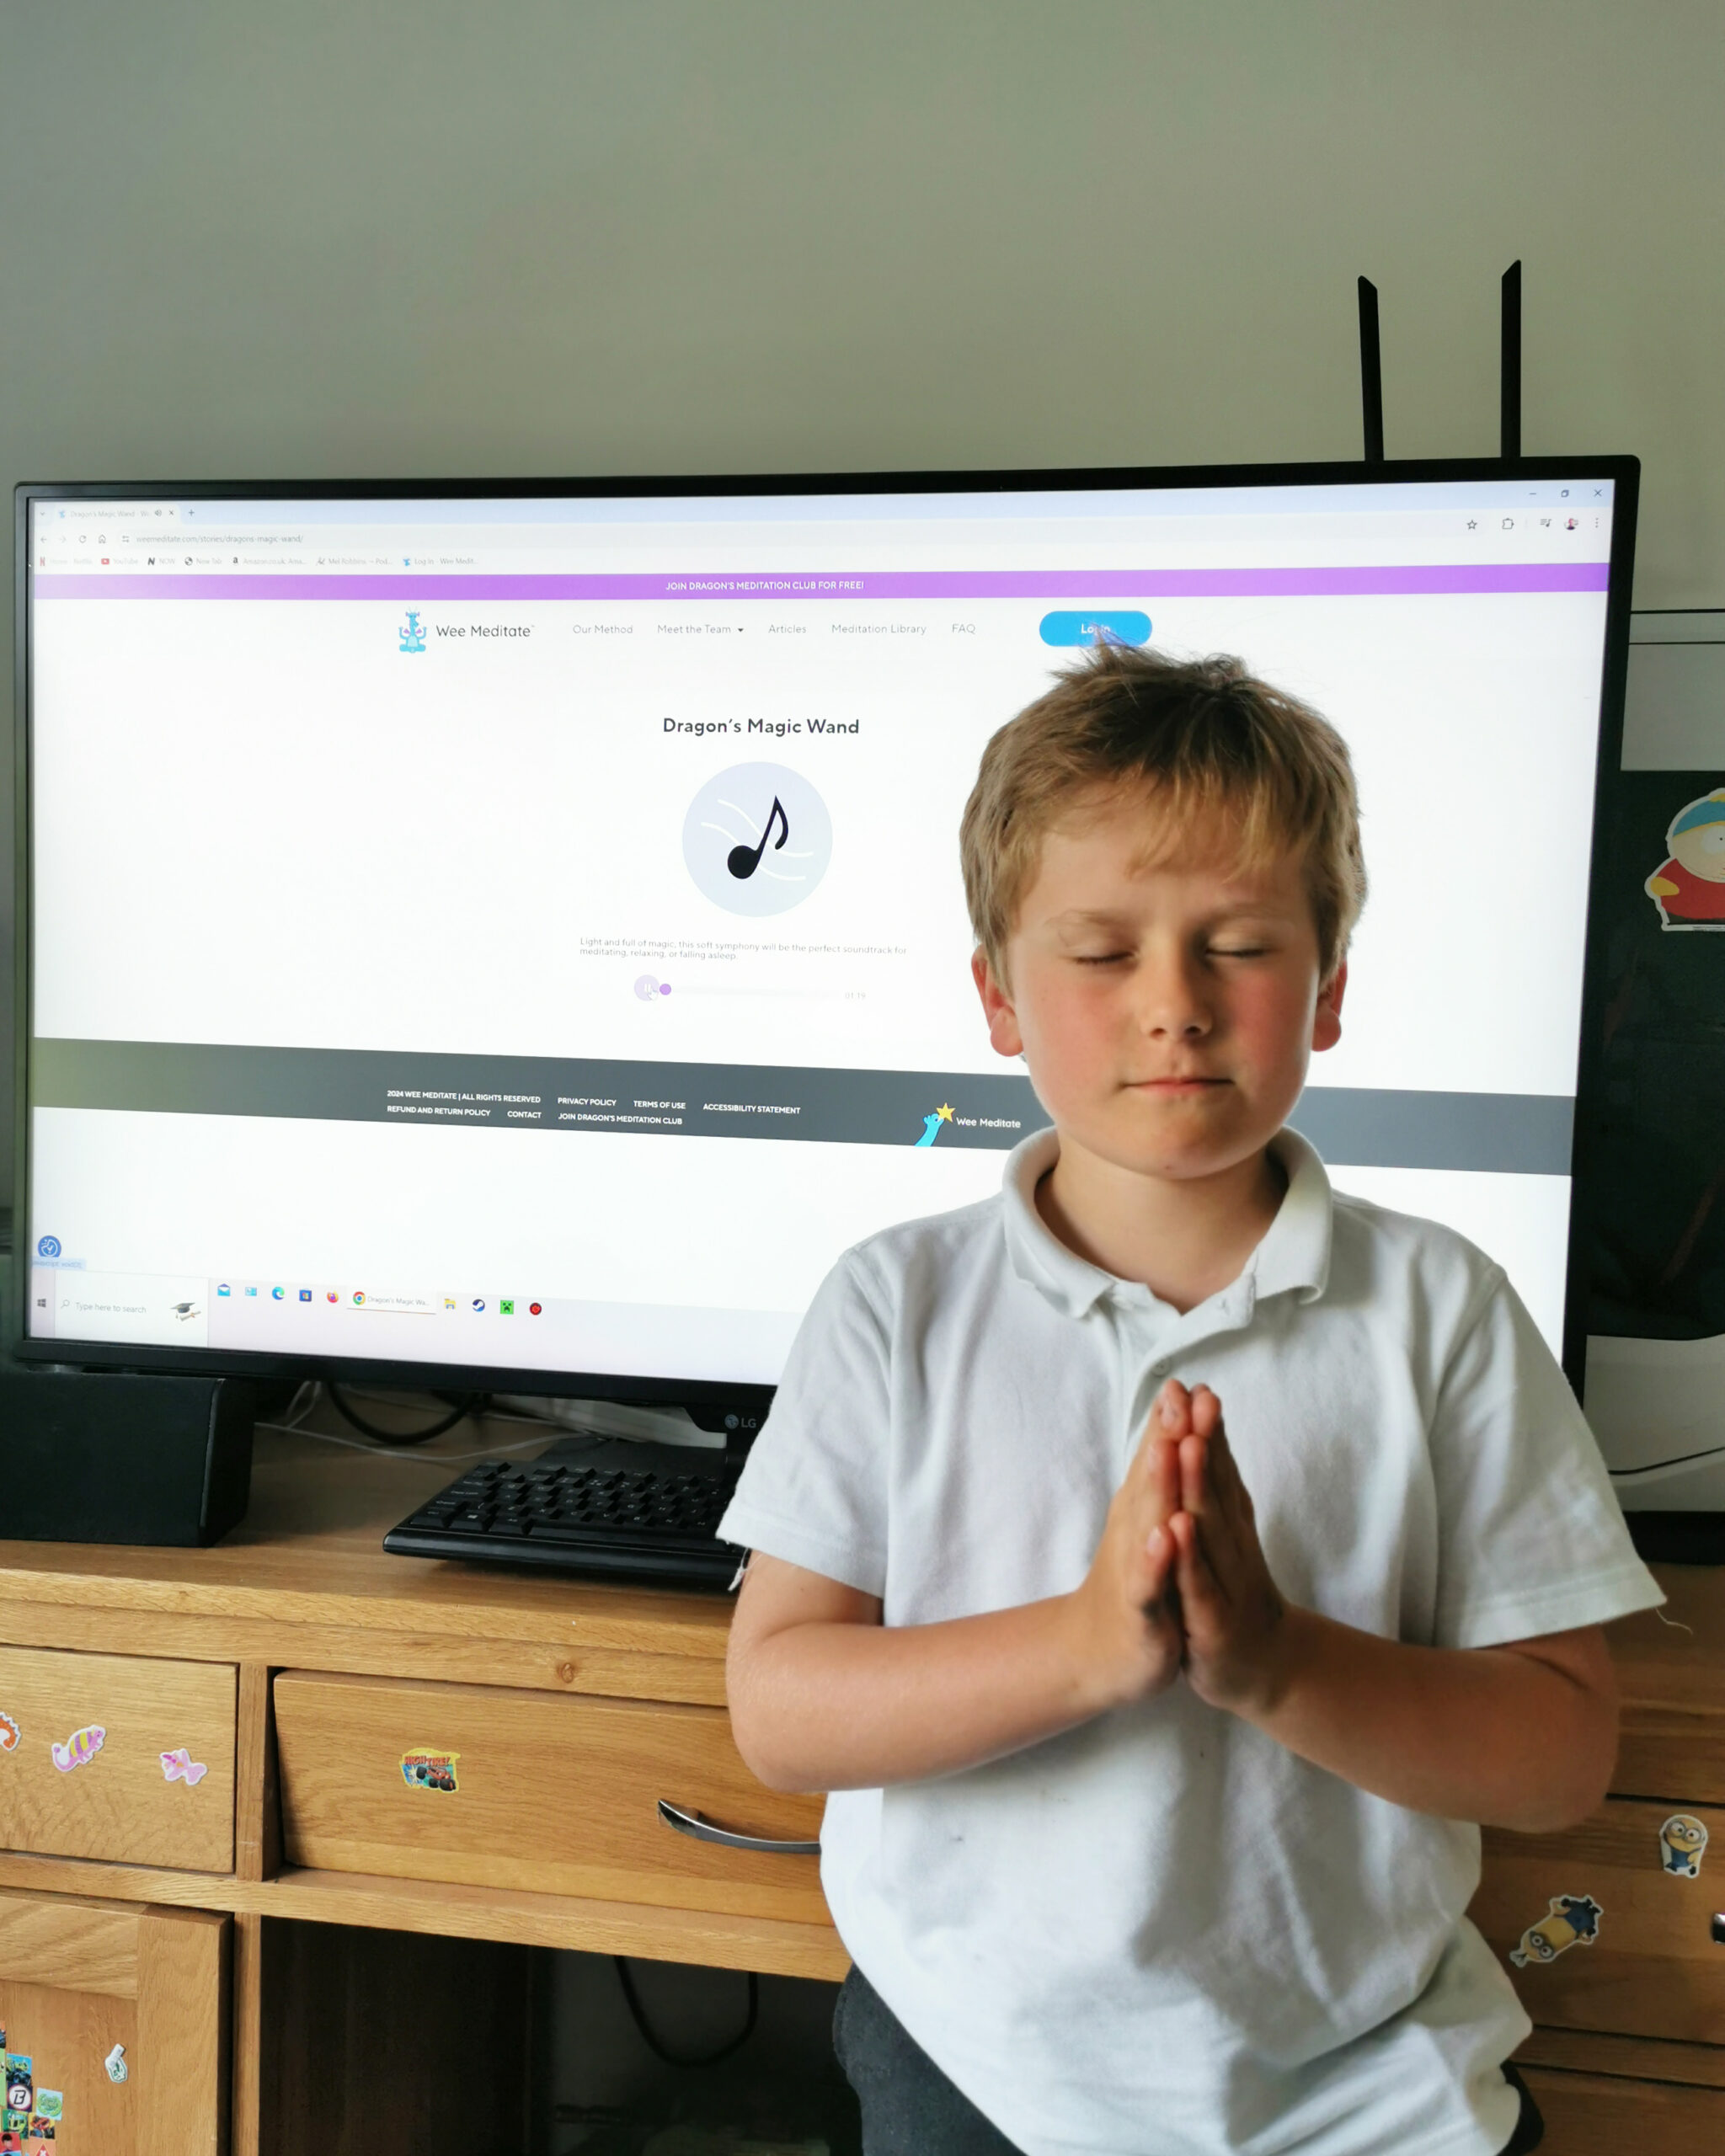 Wee Meditate, Meditation For Kids, Mindfulness, Meditating, Kids Meditation, Well-Being, Wee Meditate Review, the Frenchie Mummy, 